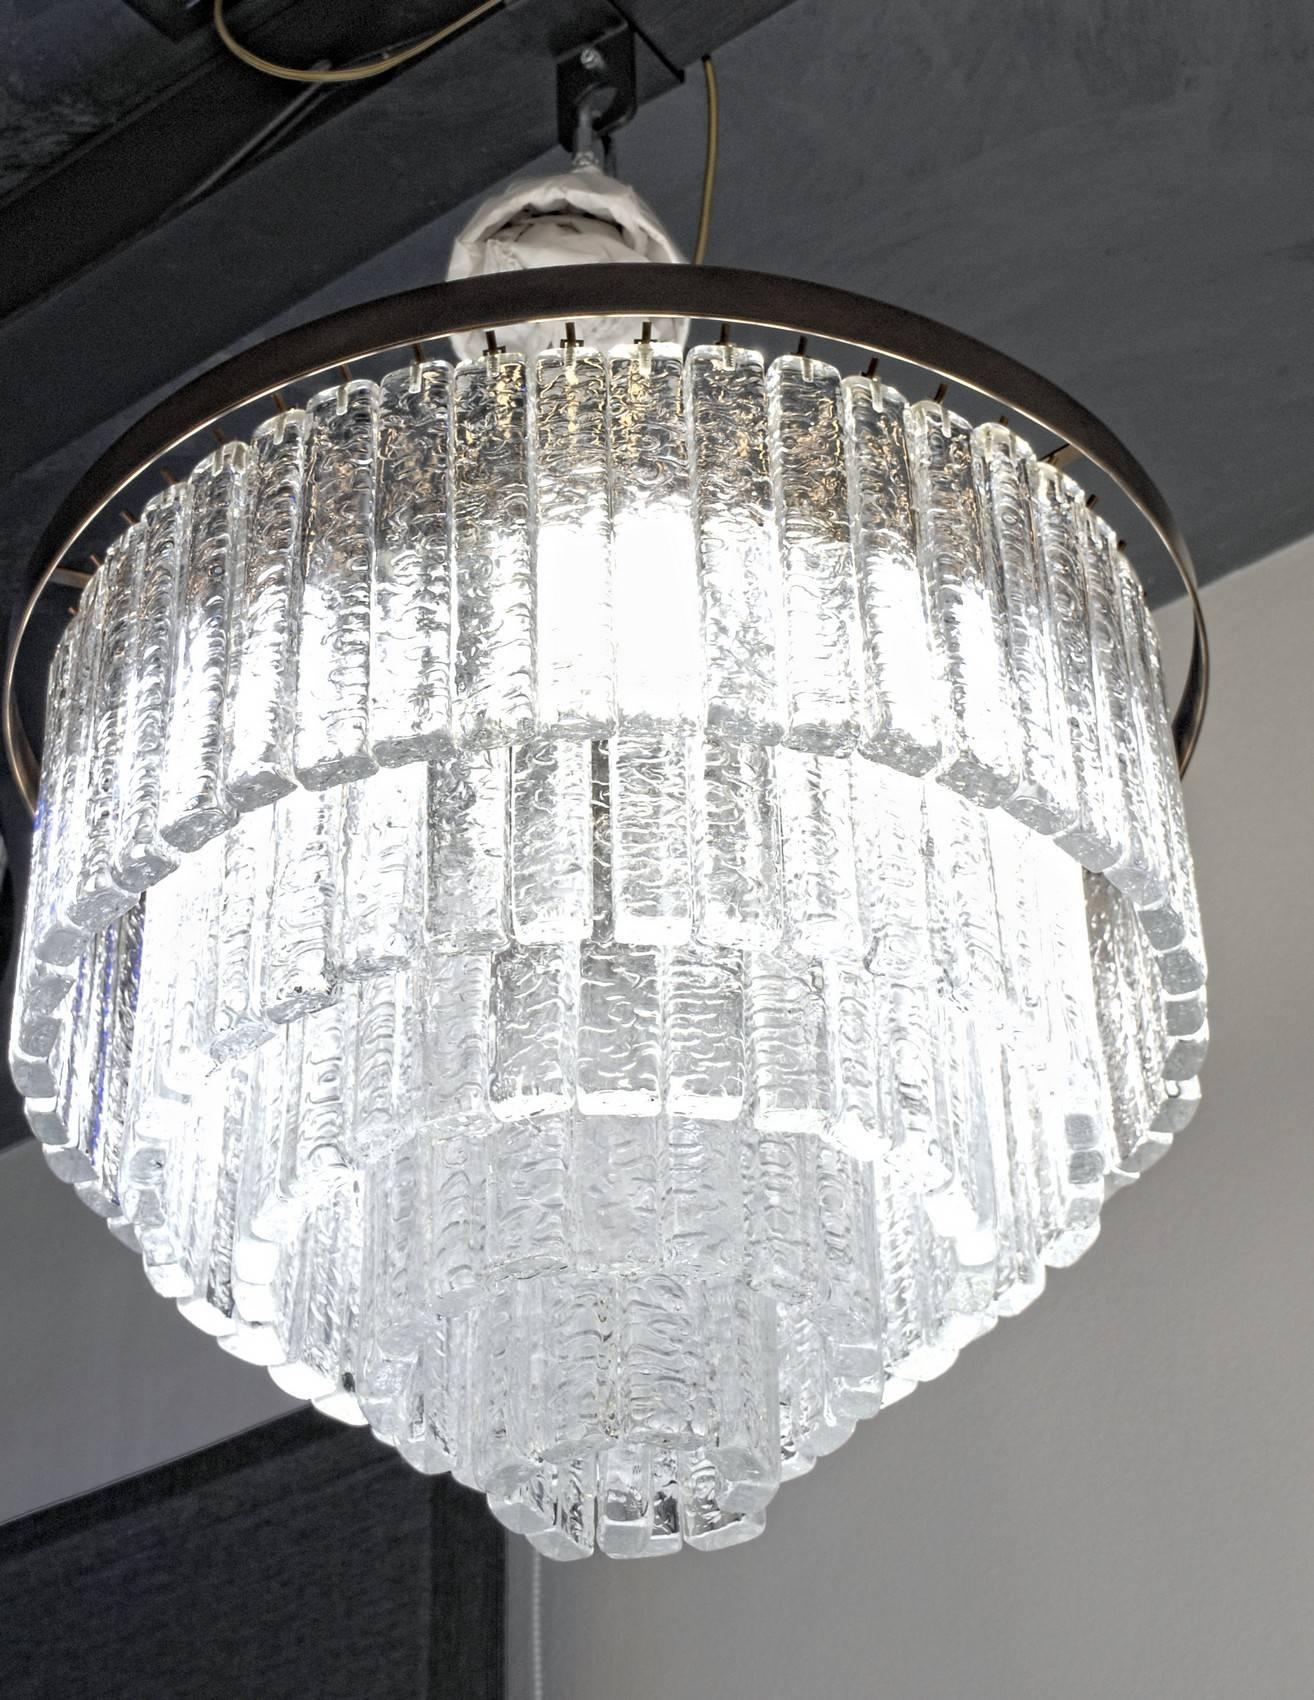 This dense and luxury midcentury chandelier carries around 140 glass elements. Each element has small grooves that are giving the appearance when lit to be white. Because it's a diffraction white appearance it is not reducing the light output as a